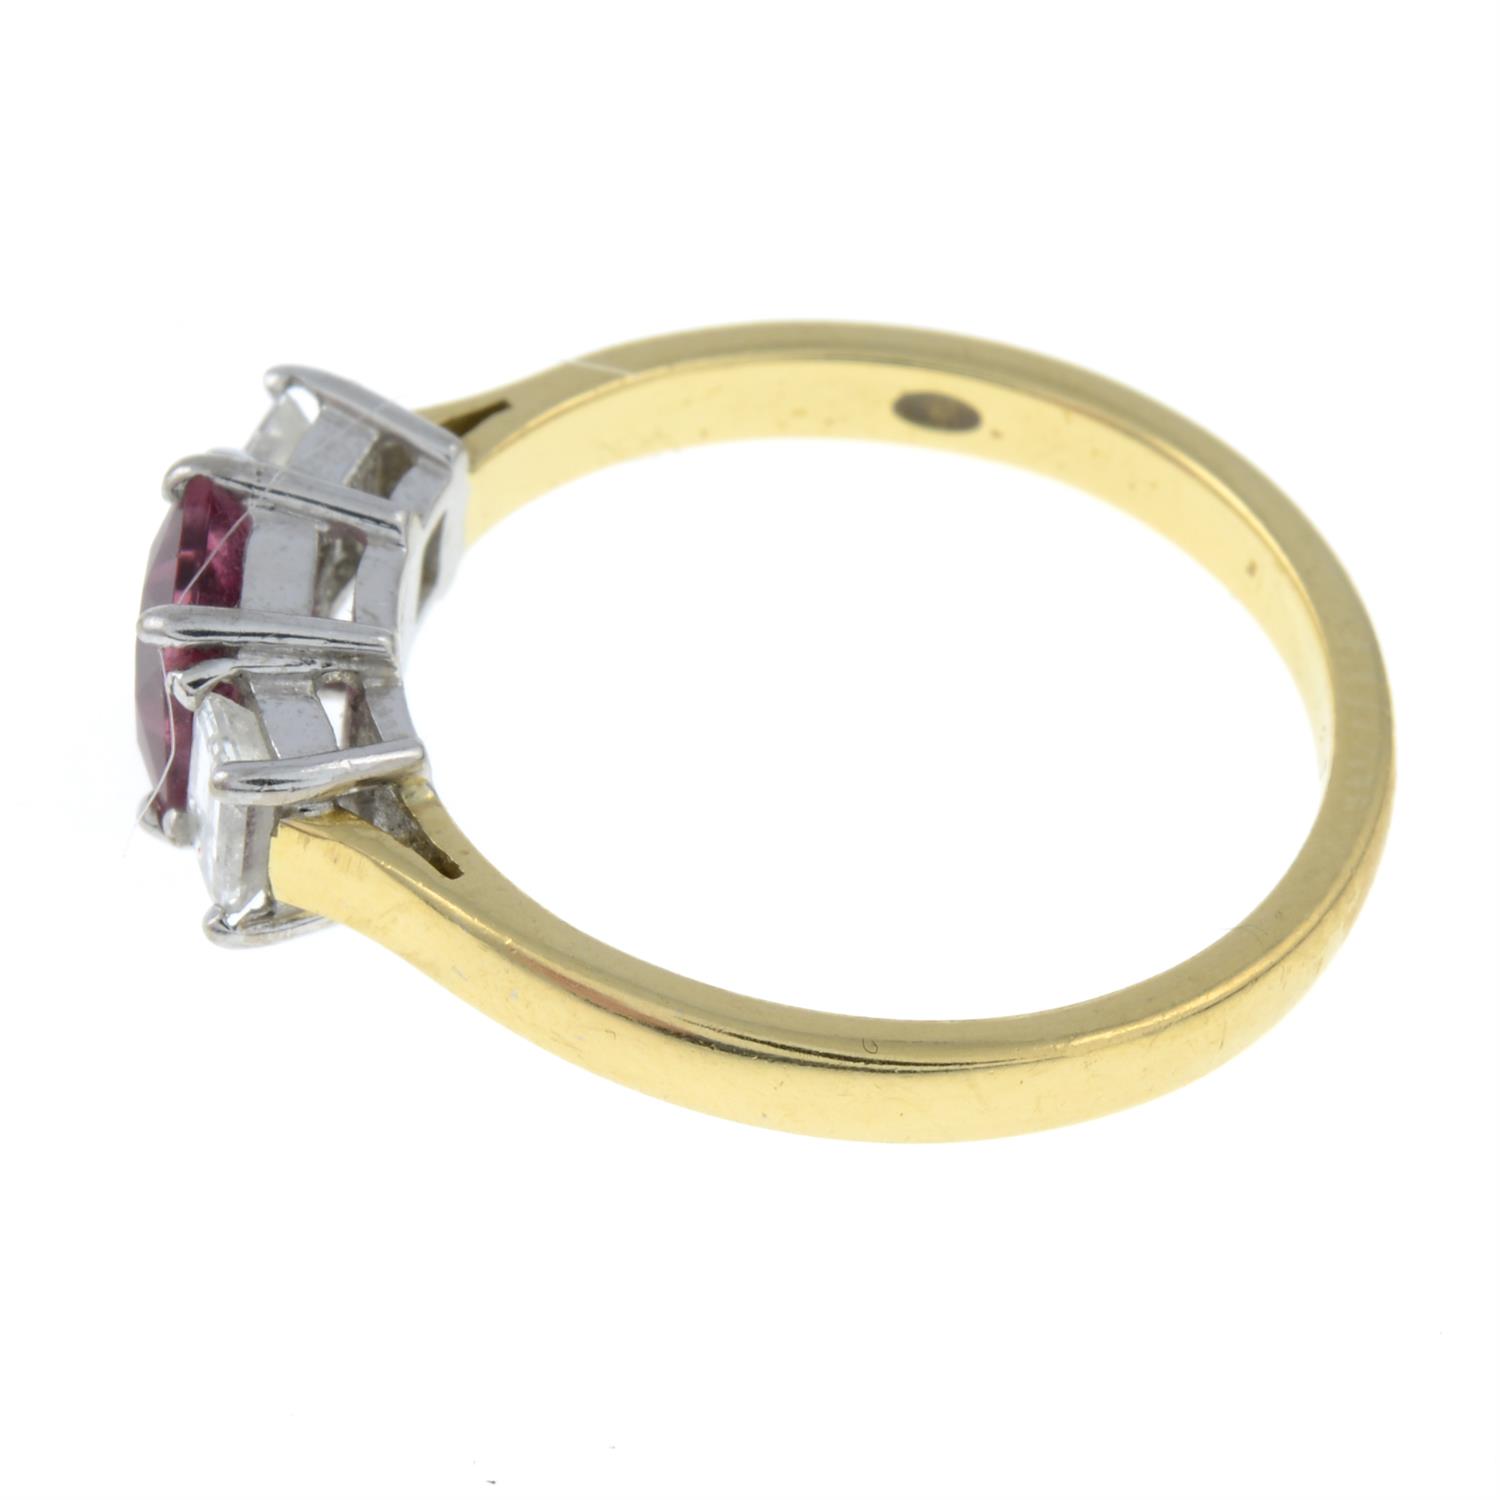 An 18ct gold pink tourmaline and diamond ring. - Image 2 of 3